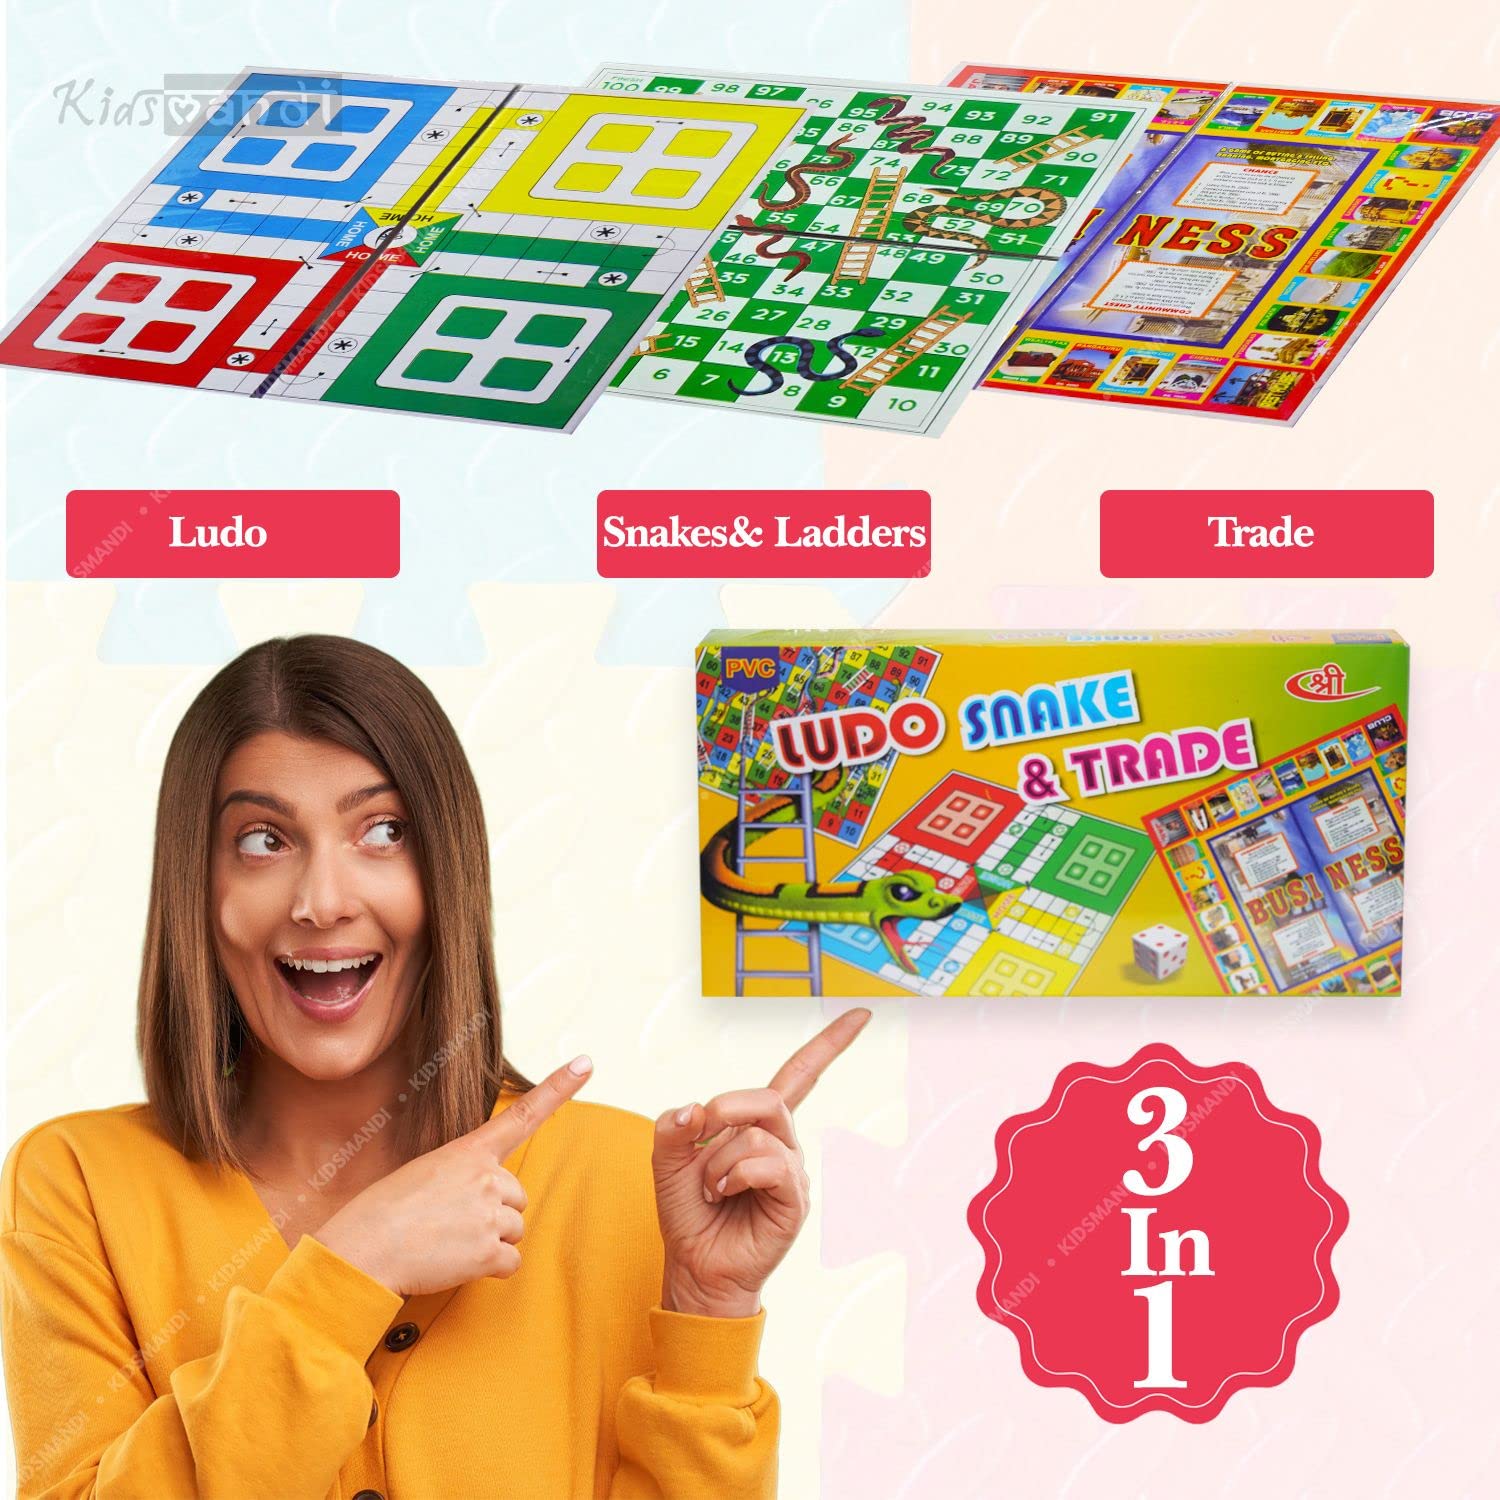 Kids Mandi 3-in-1 Family Board Game, Ludo, Snake and Ladder, Business Trade Games Set